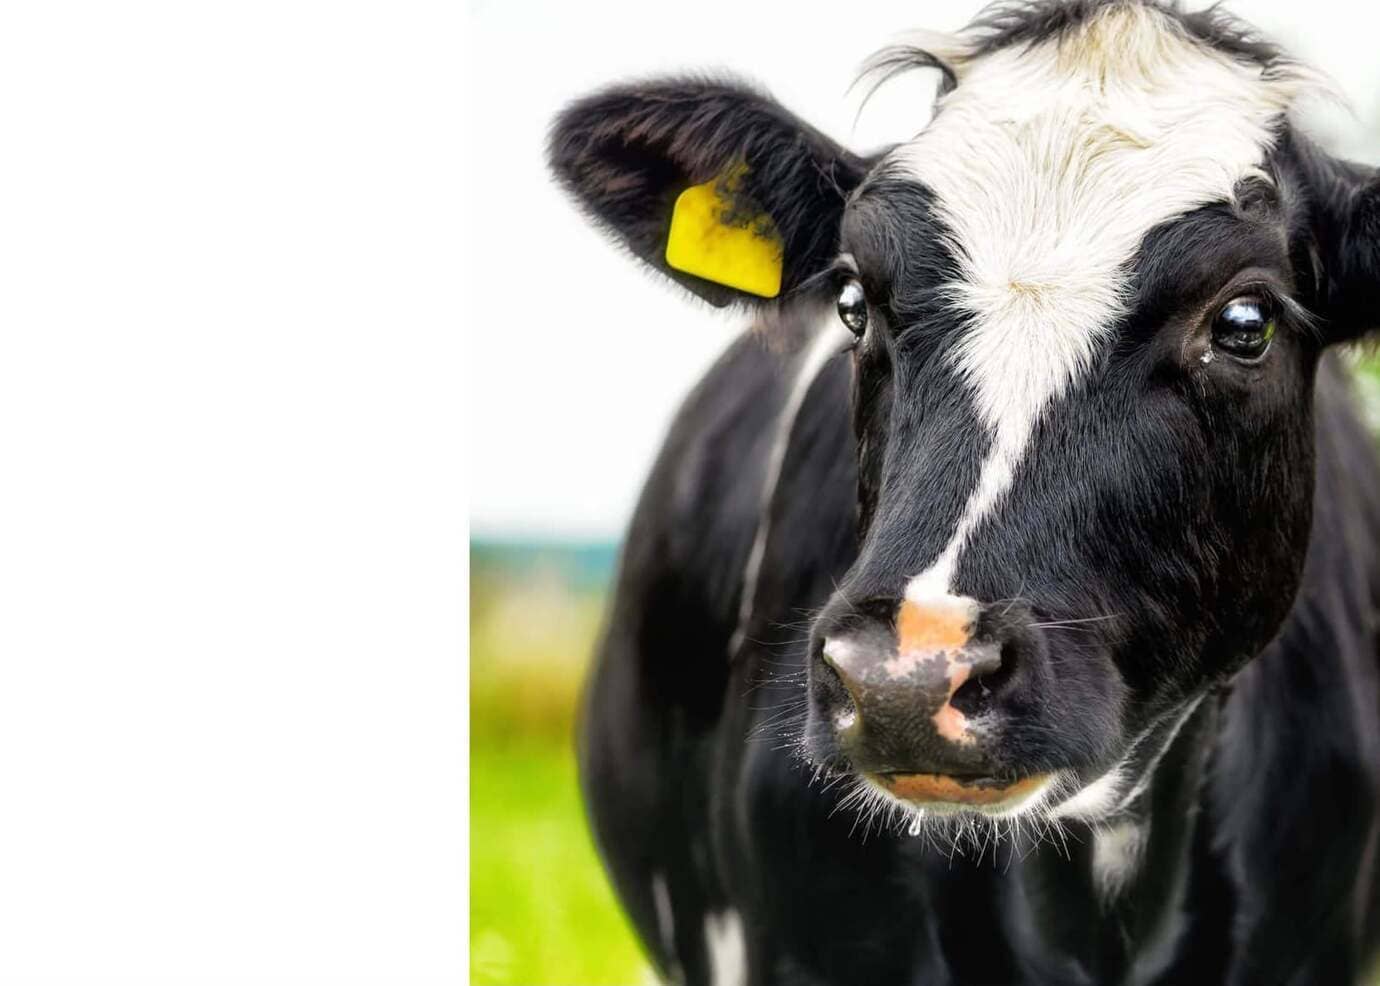 How We Find Cows That Only Produce the High-Quality A2 Protein